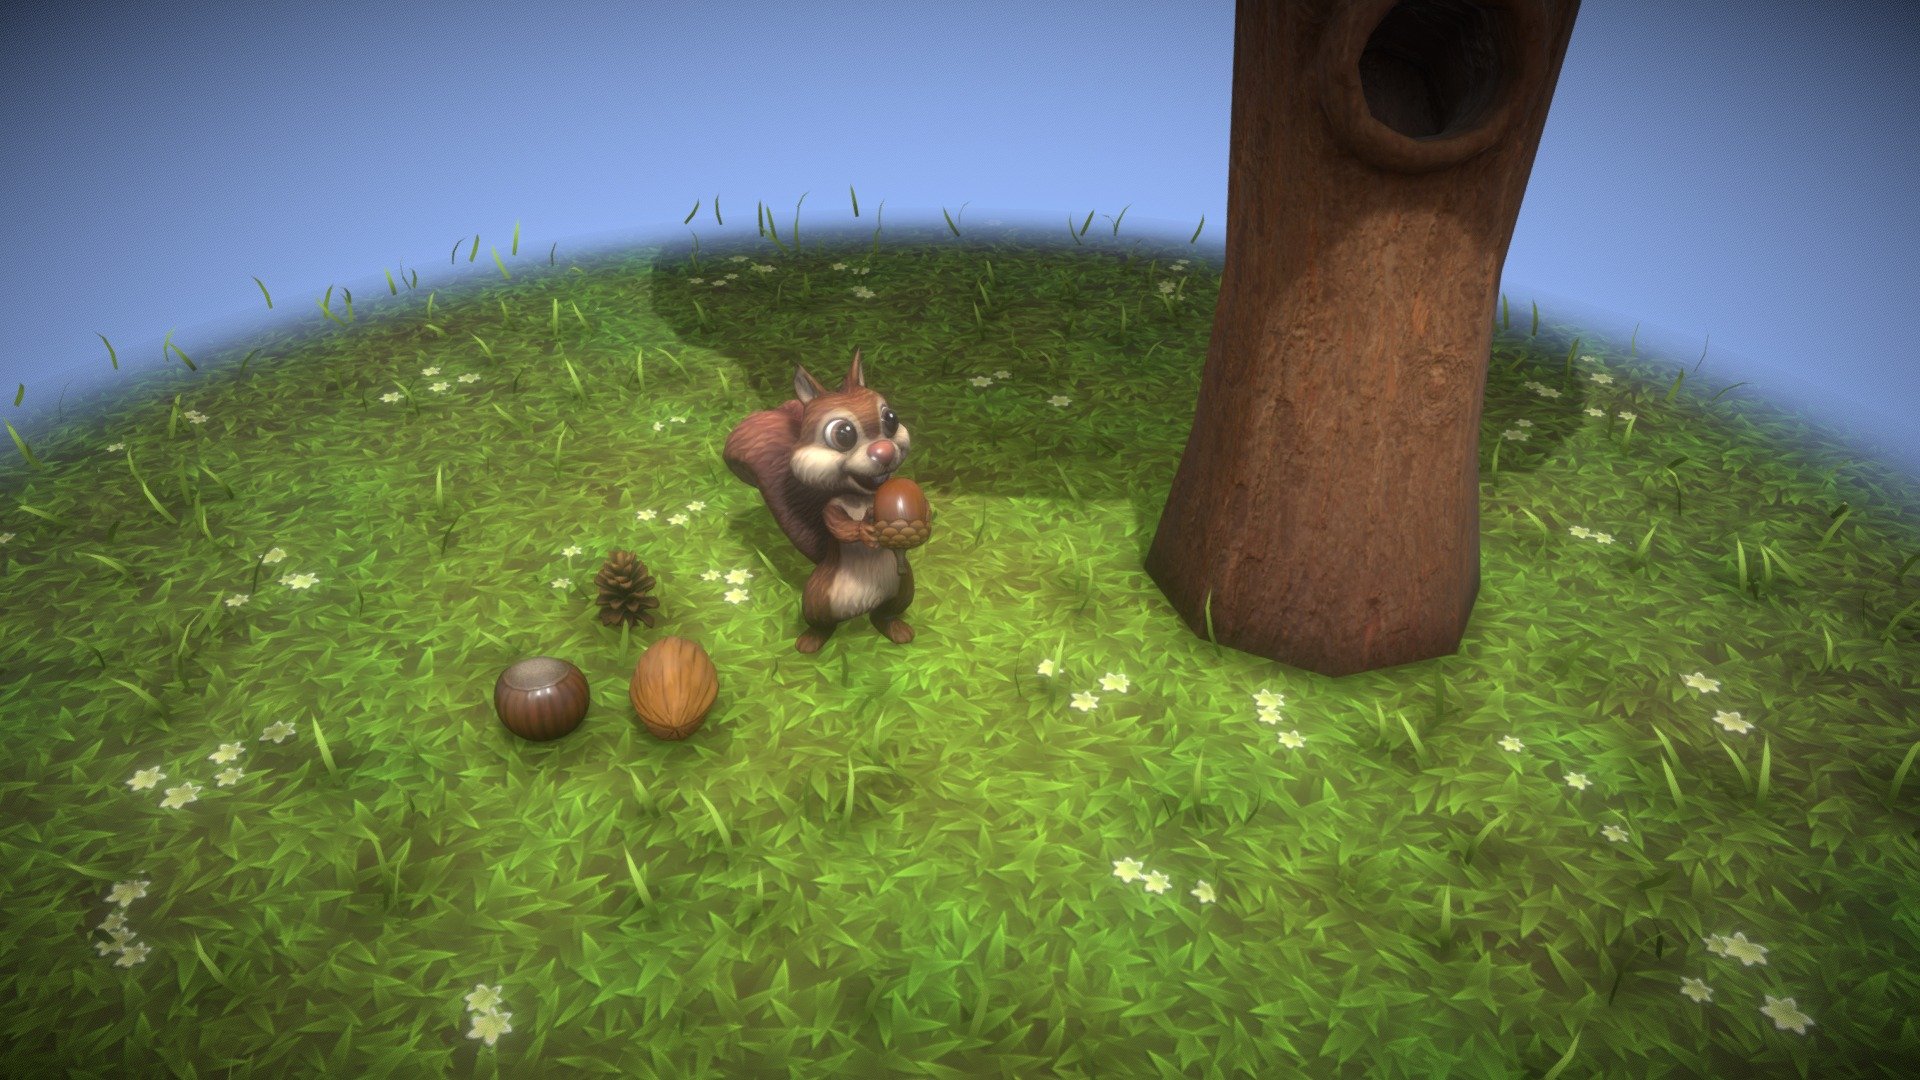 Cartoon Animated Squirrel 30 Animations with Props 3D Model consist of following 7 models: Cartoon Animated Squirrel, Cartoon Tree With Hollow, Cartoon Grass, Cartoon Acorn, Cartoon Pine Cone, Cartoon Hazelnut, and Cartoon Walnut.  

Technical details:  




File formats included in the package are: FBX, GLB, ABC, DAE, OBJ, PLY, STL, BLEND, UnityPackage, gLTF (generated), USDZ (generated)

Native software file format: BLEND

Render engine: Eevee

Squirrel - Polygons: 2,164, Vertices: 1,761

Tree with Hollow - Polygons: 432, Vertices: 405

Grass - Polygons: 1,392, Vertices: 3,159

Acorn - Polygons: 480, Vertices: 482

Pine Cone - Polygons: 2,336, Vertices: 2,650

Hazelnut - Polygons: 544, Vertices: 514

Walnut - Polygons: 384, Vertices: 386

Textures (for each model): Color, Metallic, Roughness, Normal, AO

All textures are 2k resolution.

The squirrel model is rigged and animated.

30 animations are included
 - Cartoon Squirrel 30 Animations with Props - Buy Royalty Free 3D model by 3DDisco 3d model